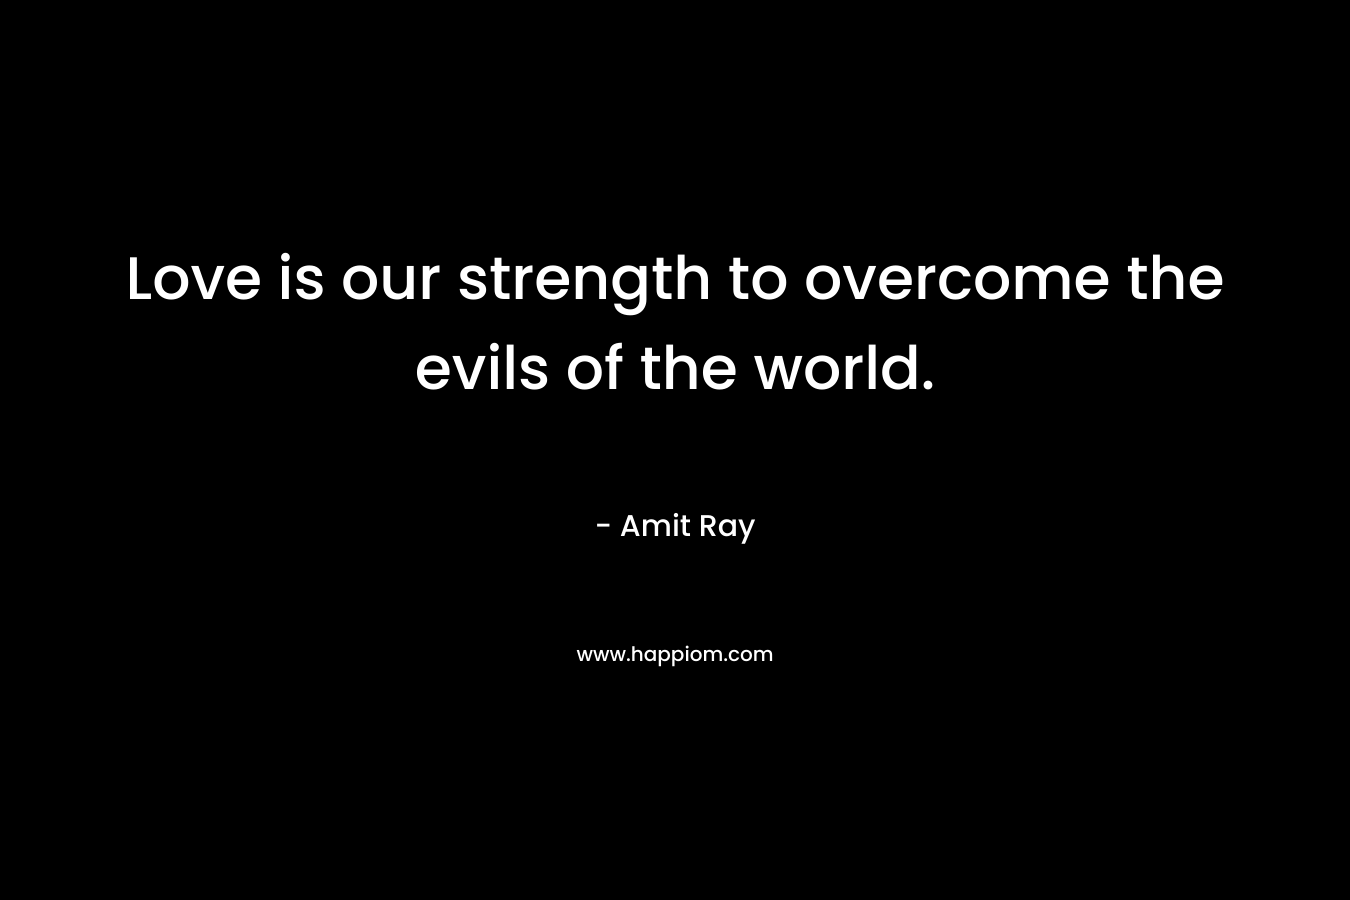 Love is our strength to overcome the evils of the world.